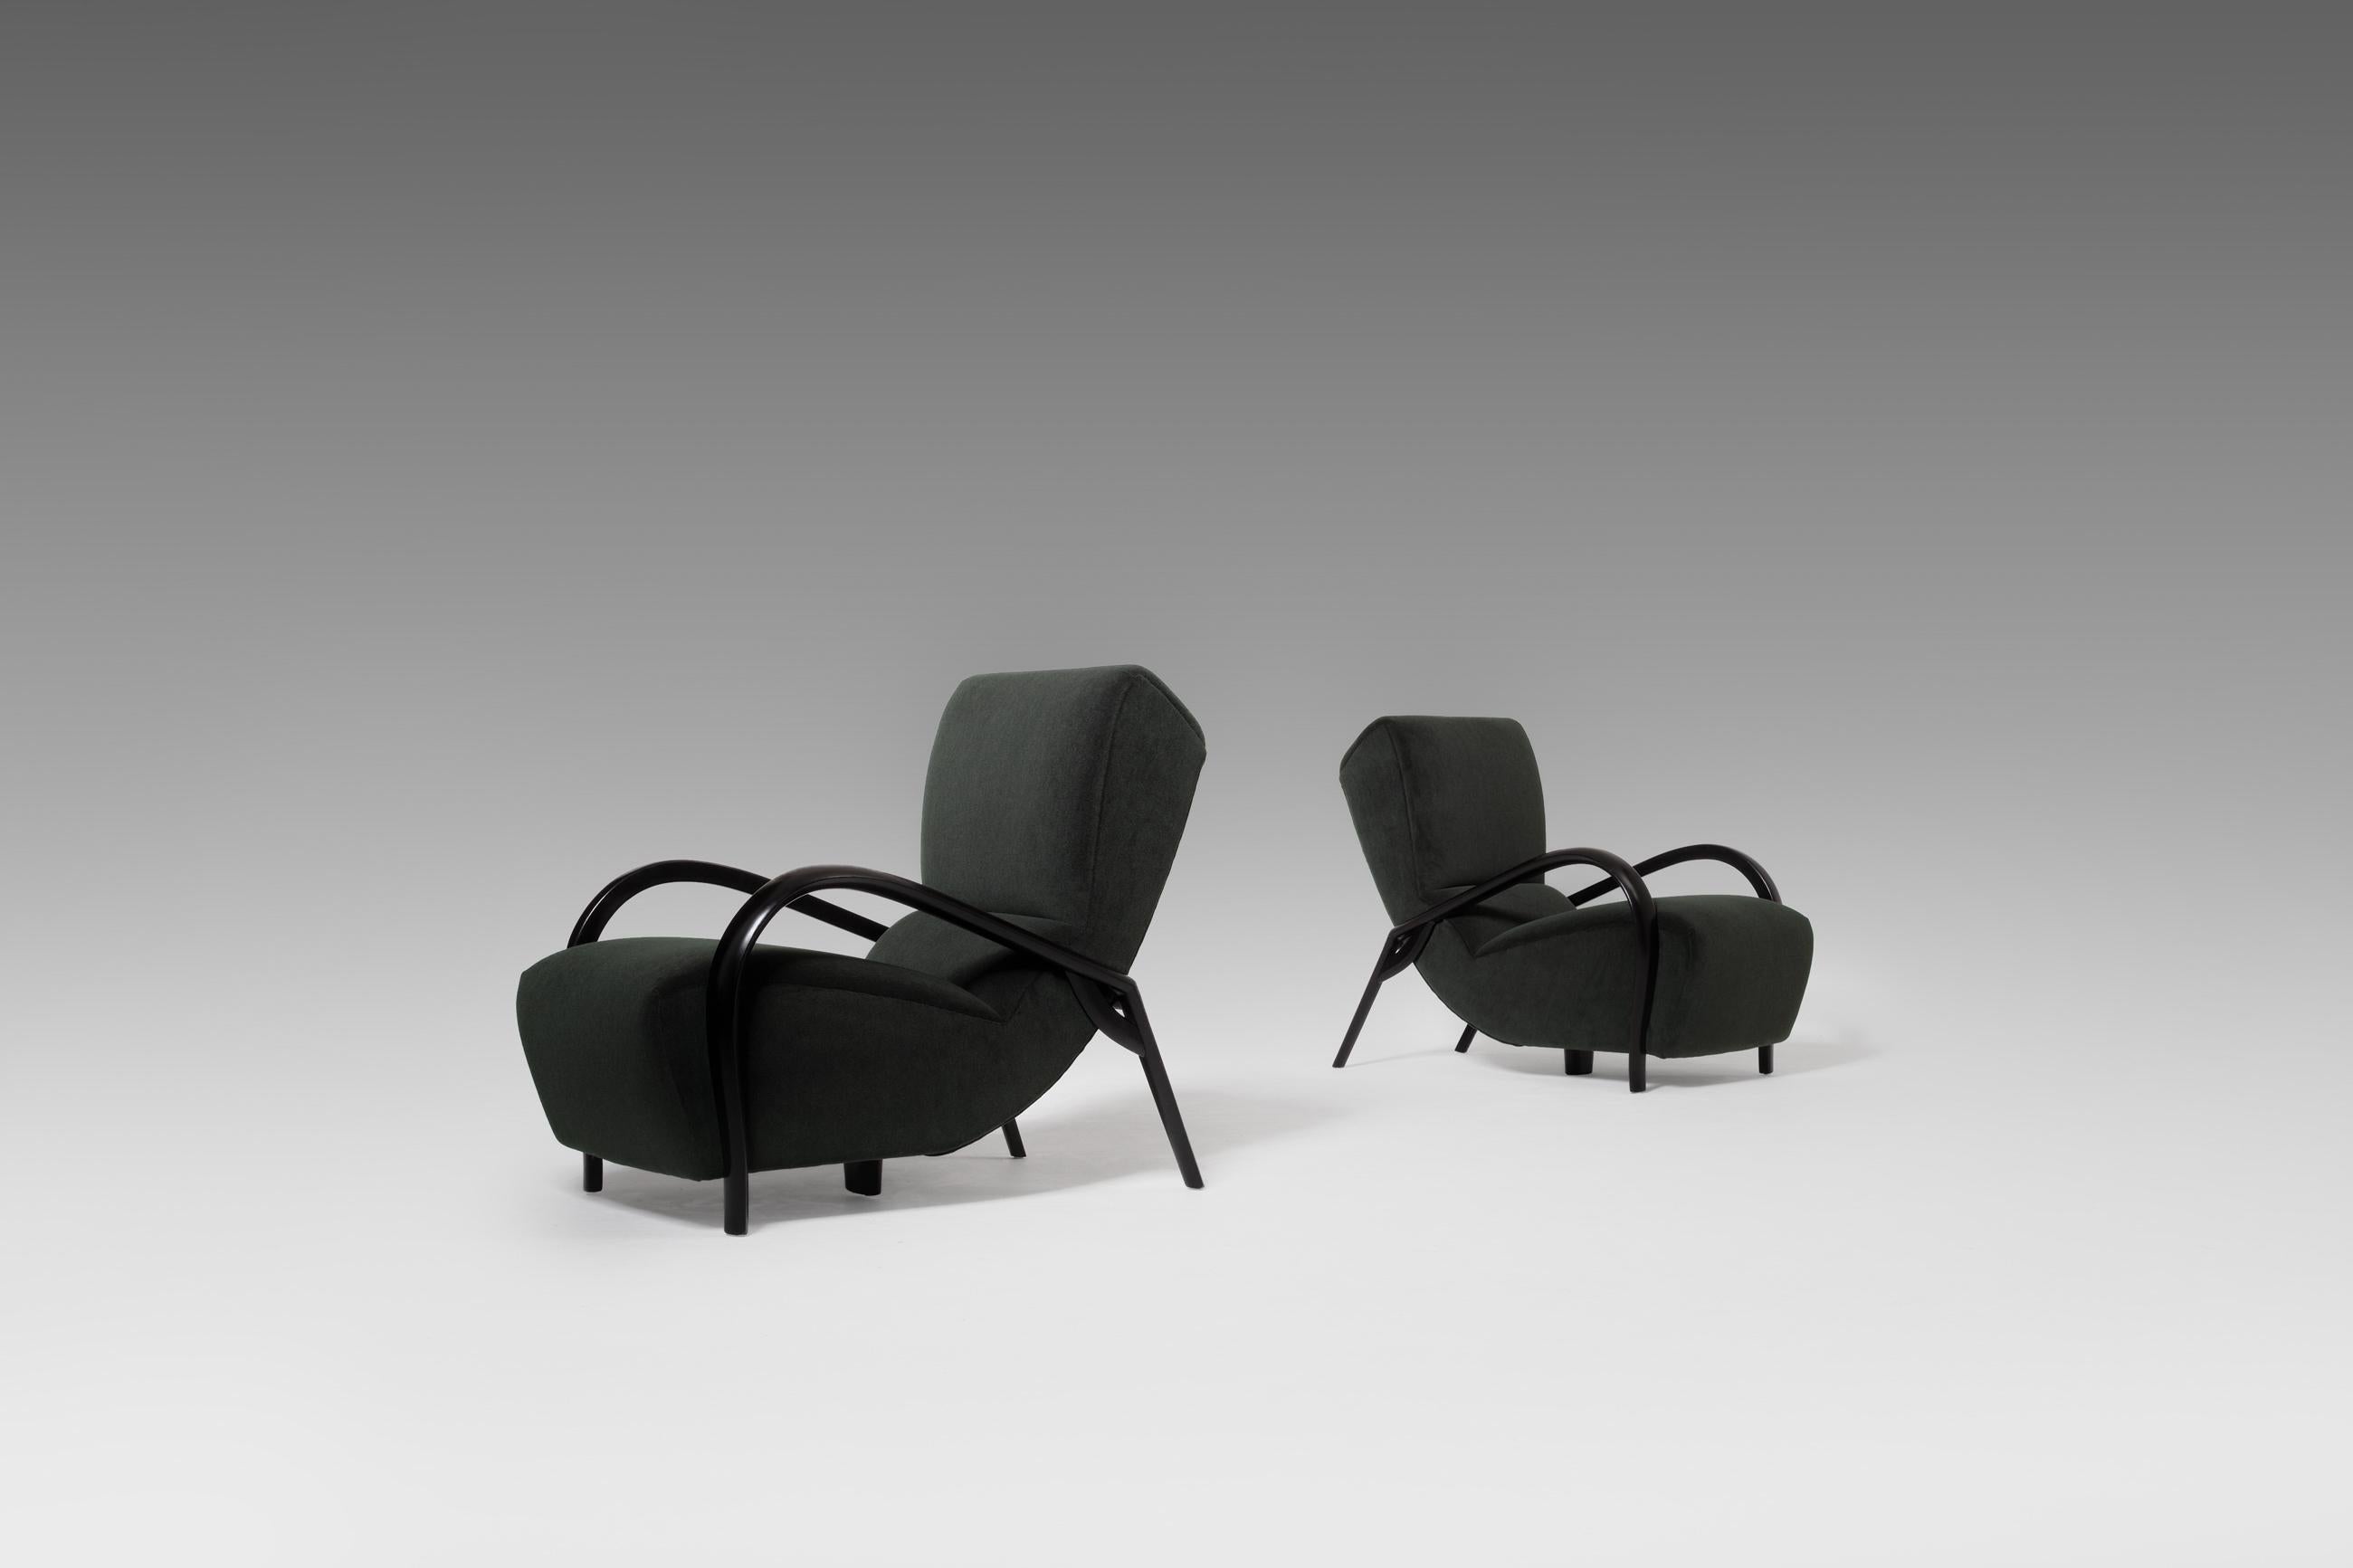 European Pair of Curved Italian Lounge Chairs